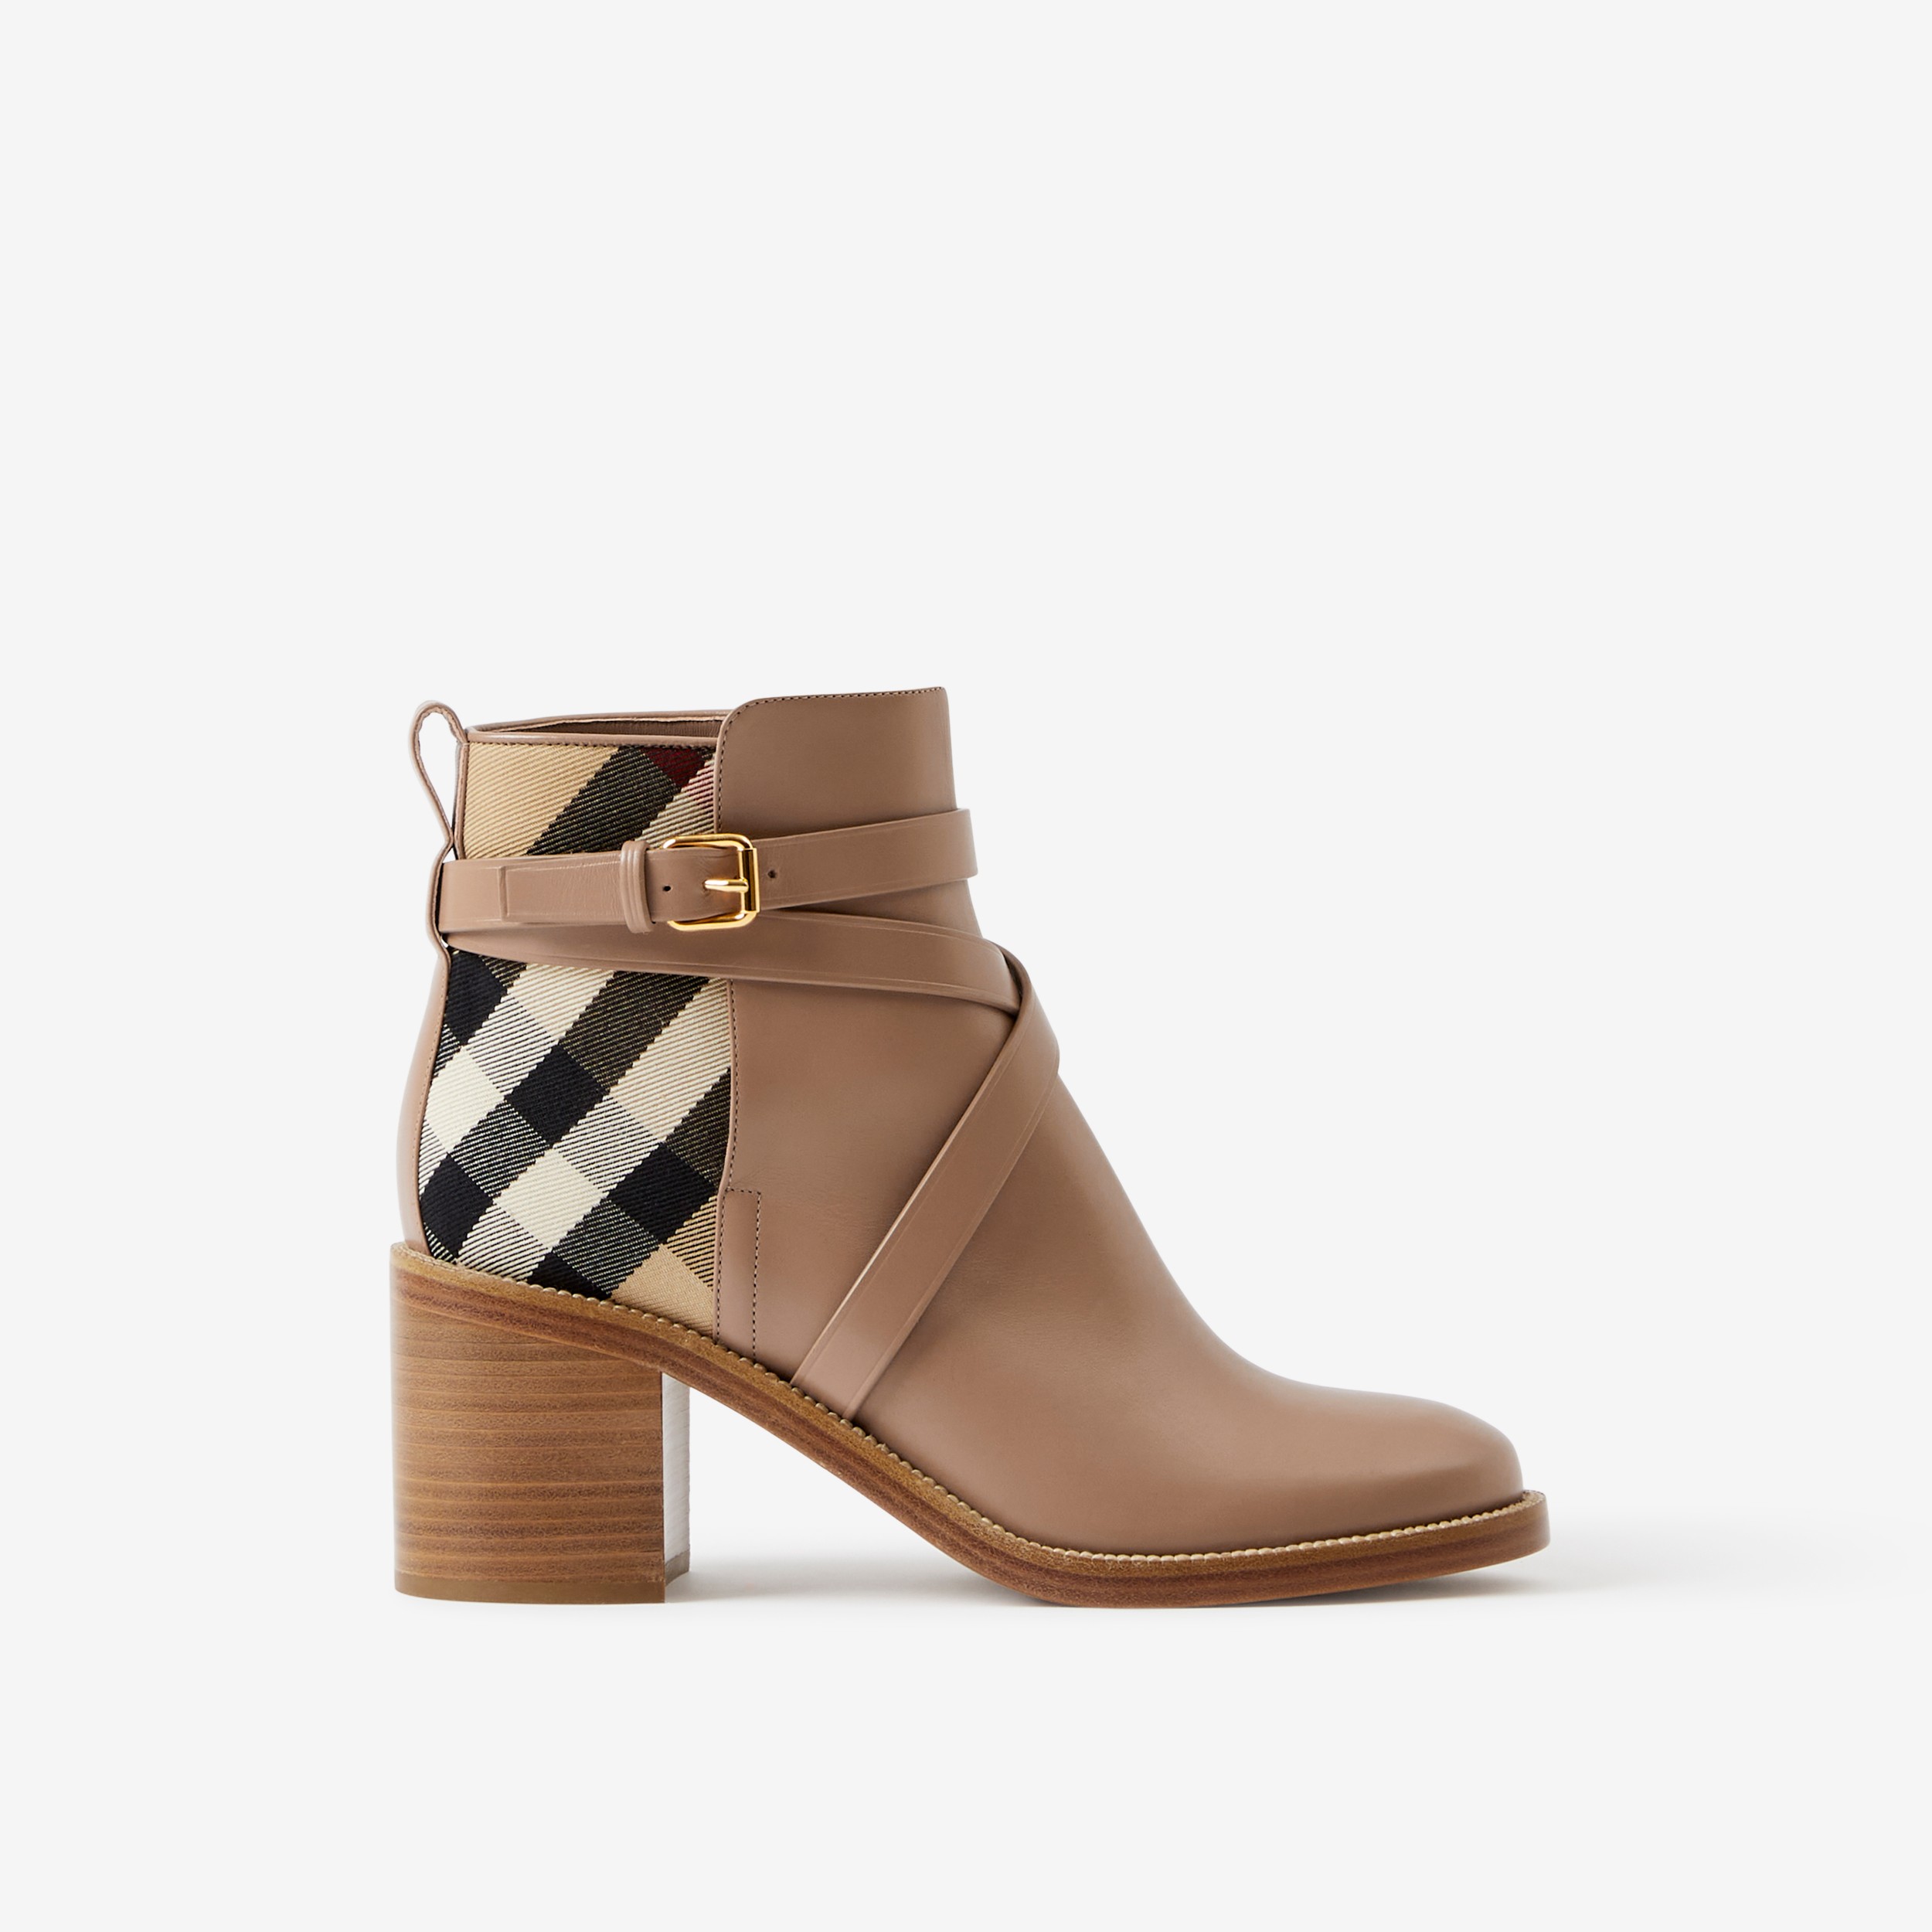 Luxurious Leather: Burberry Women's Leather & House Check Boots